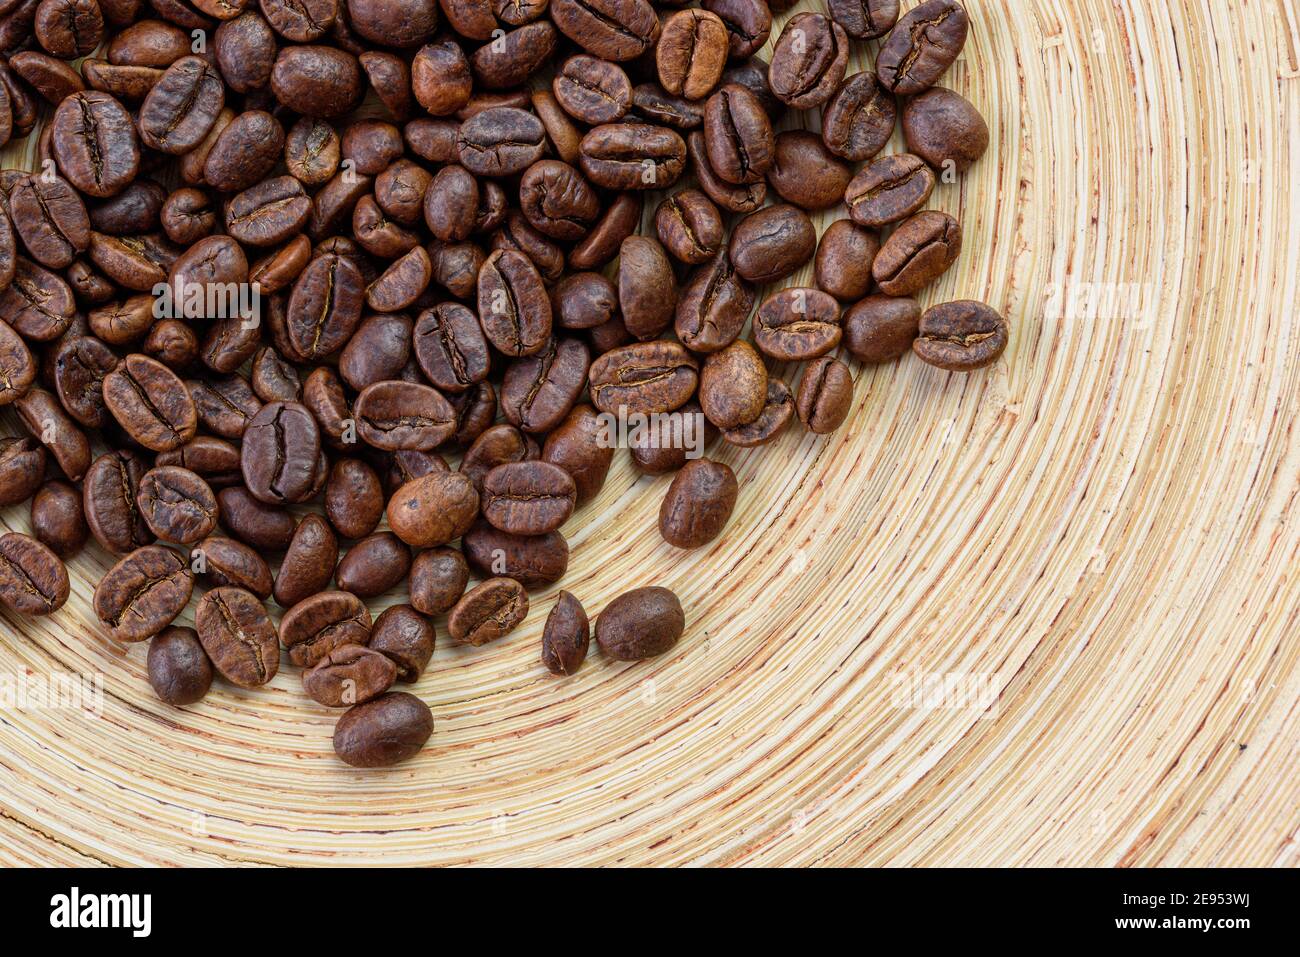 Decaffeinated coffee beans in a bowl, sunny, warm colors, close-up, top view, flat lay Stock Photo